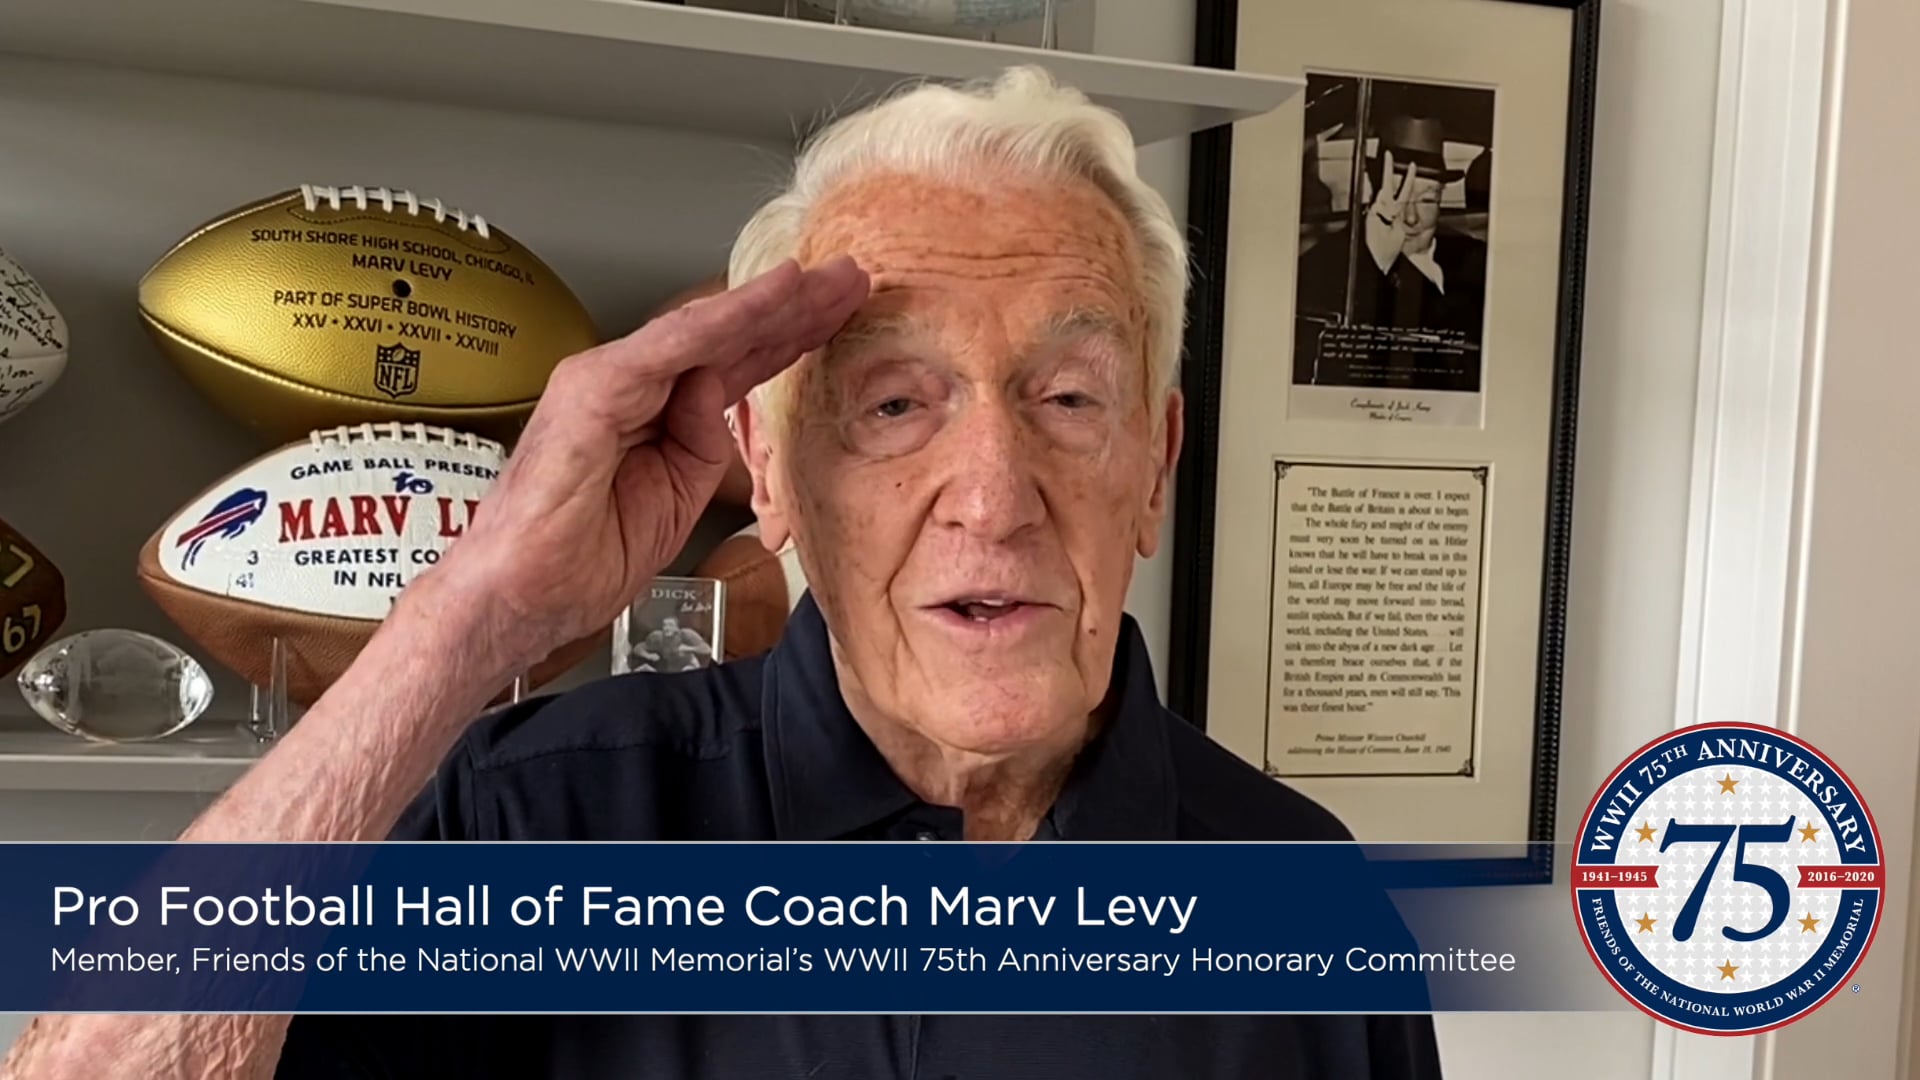 Coach Marv Levy V-J Day 75th Message on Vimeo